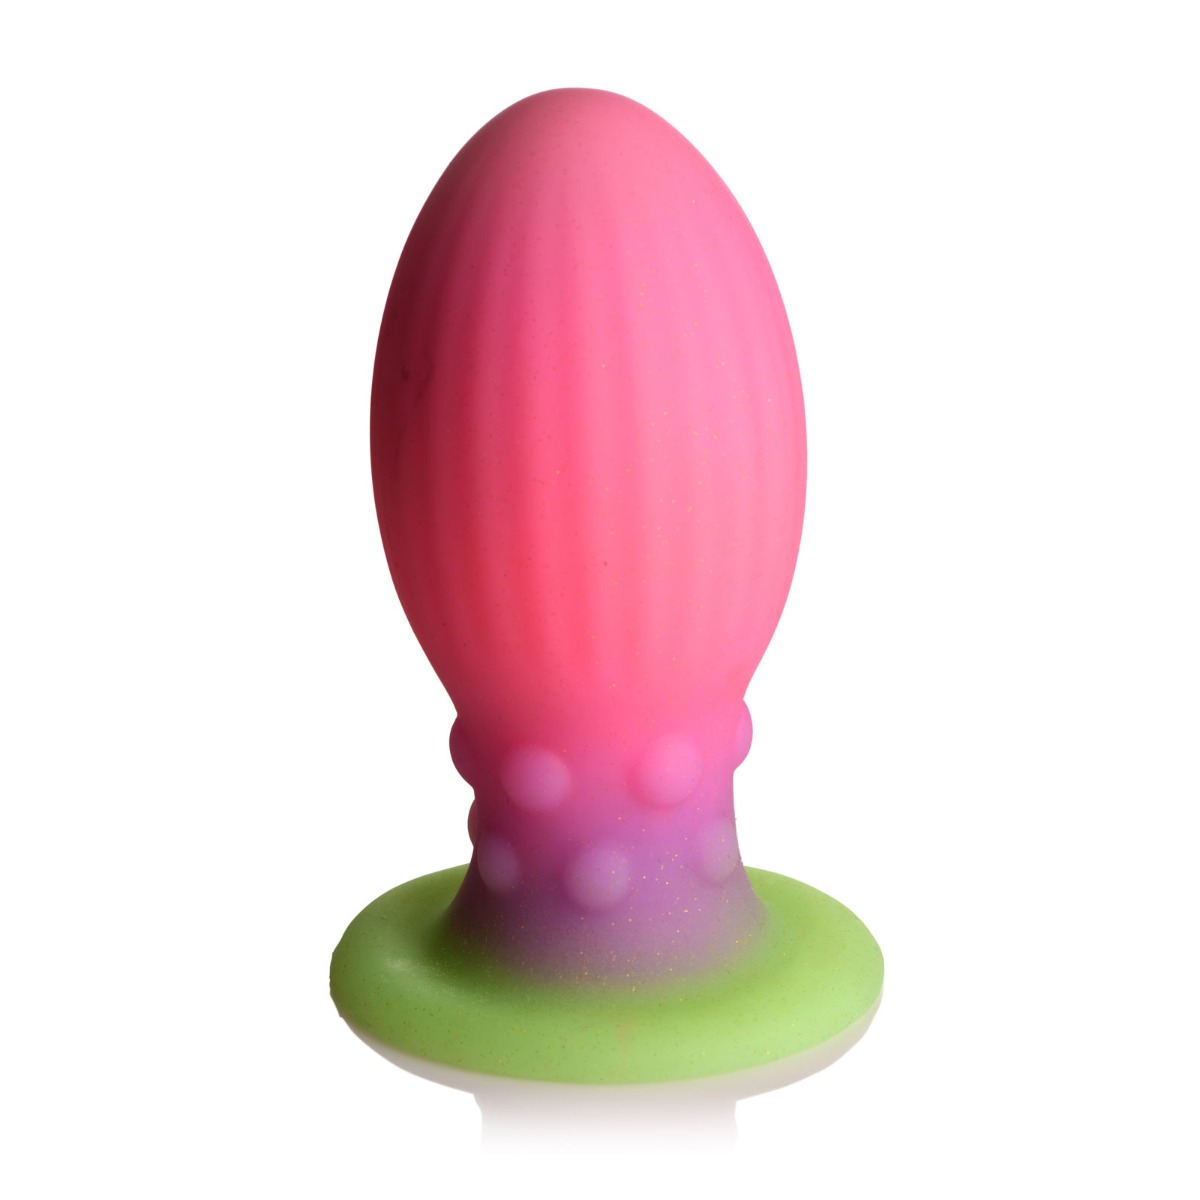 Creature Cocks Xeno Egg Glow in the Dark Silicone Egg Pink X-Large 6.1 Inch